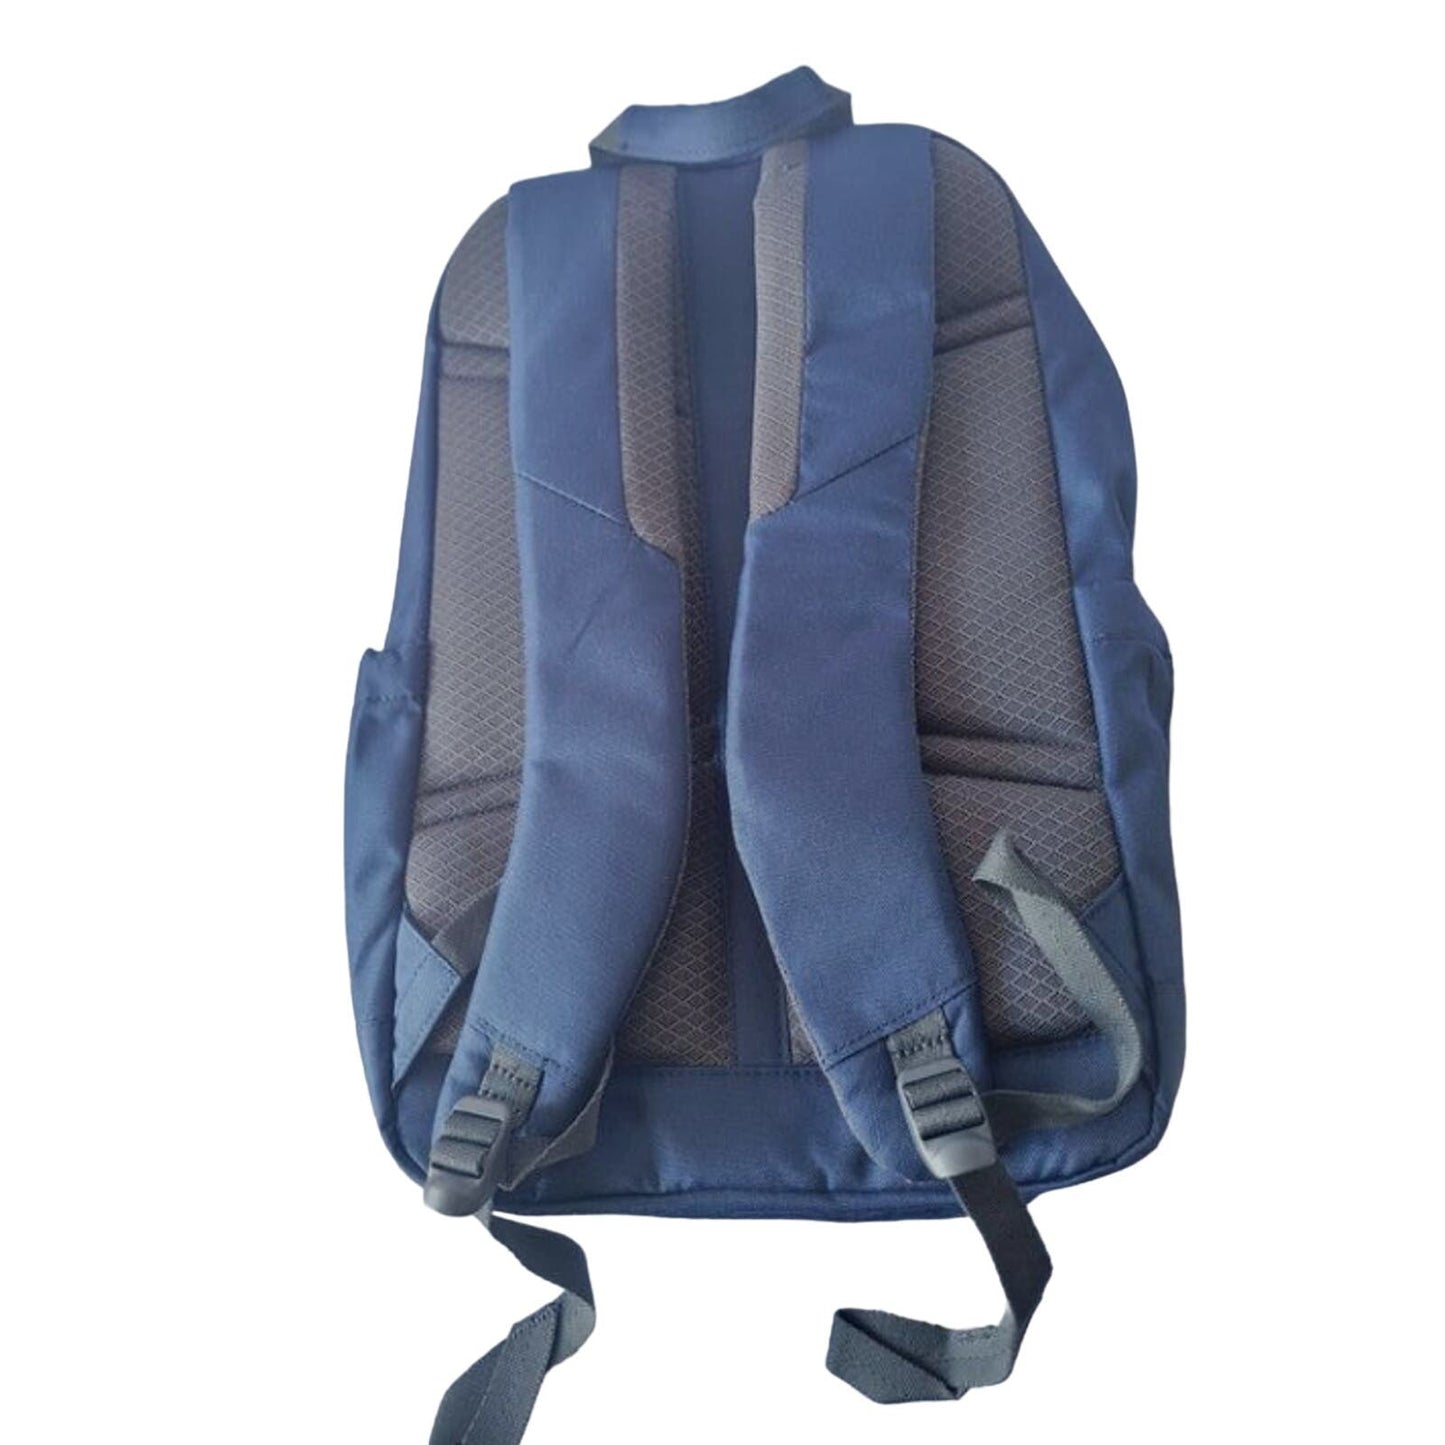 Made by Design Carry On Blue Backpack